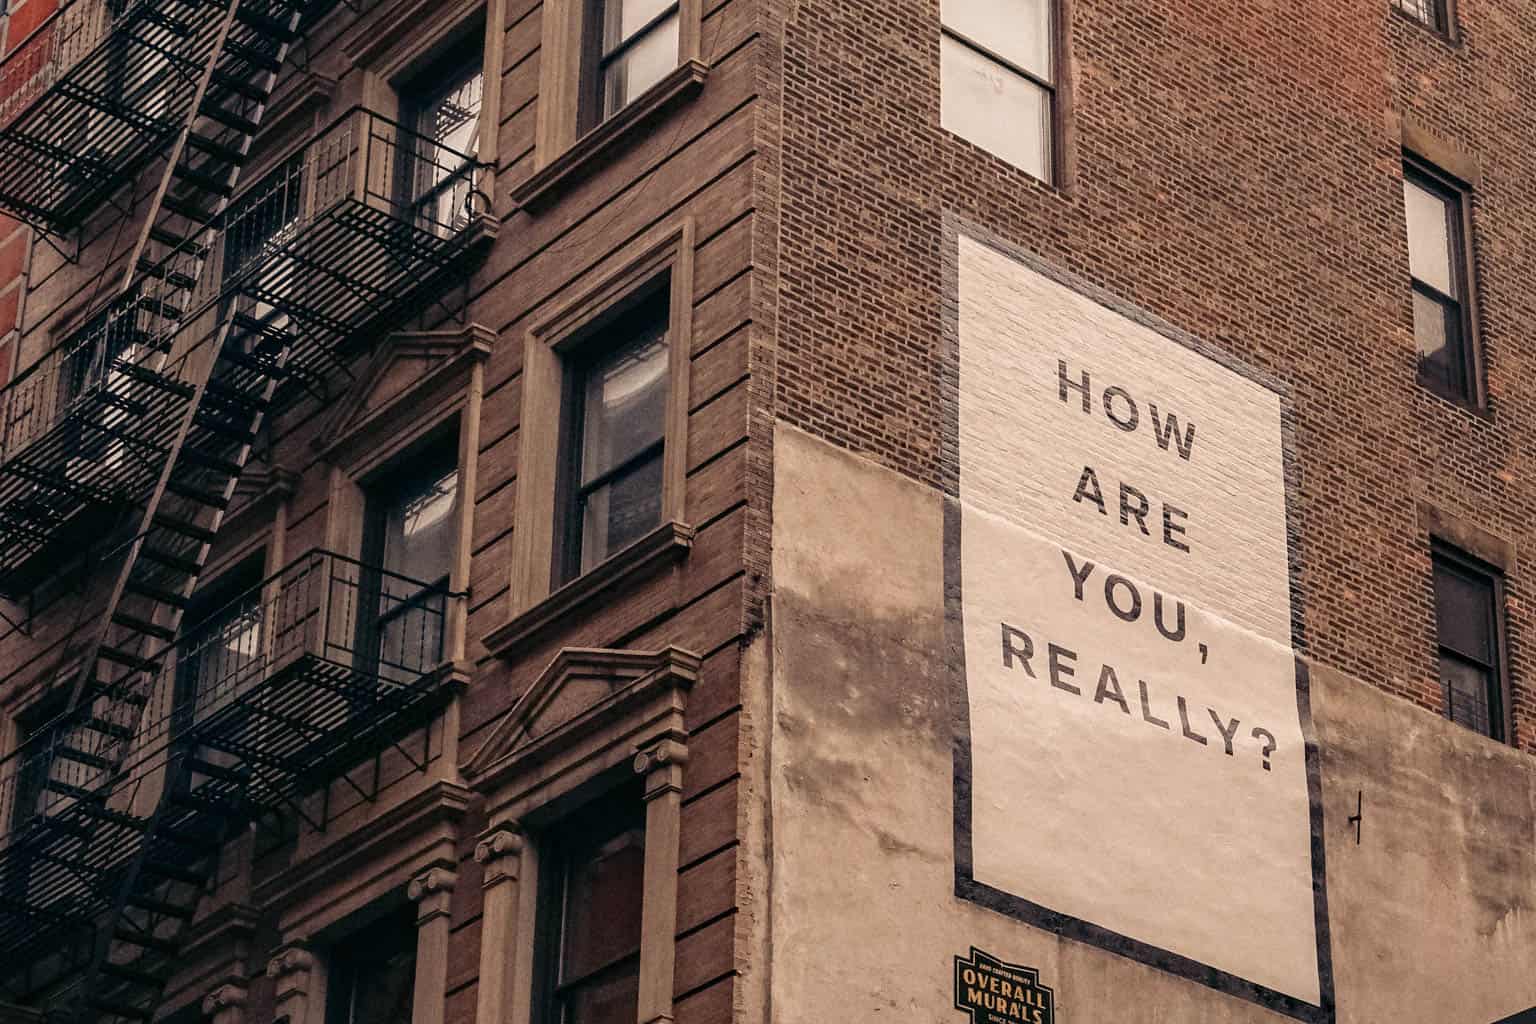 "How Are You Really" poster on a building.